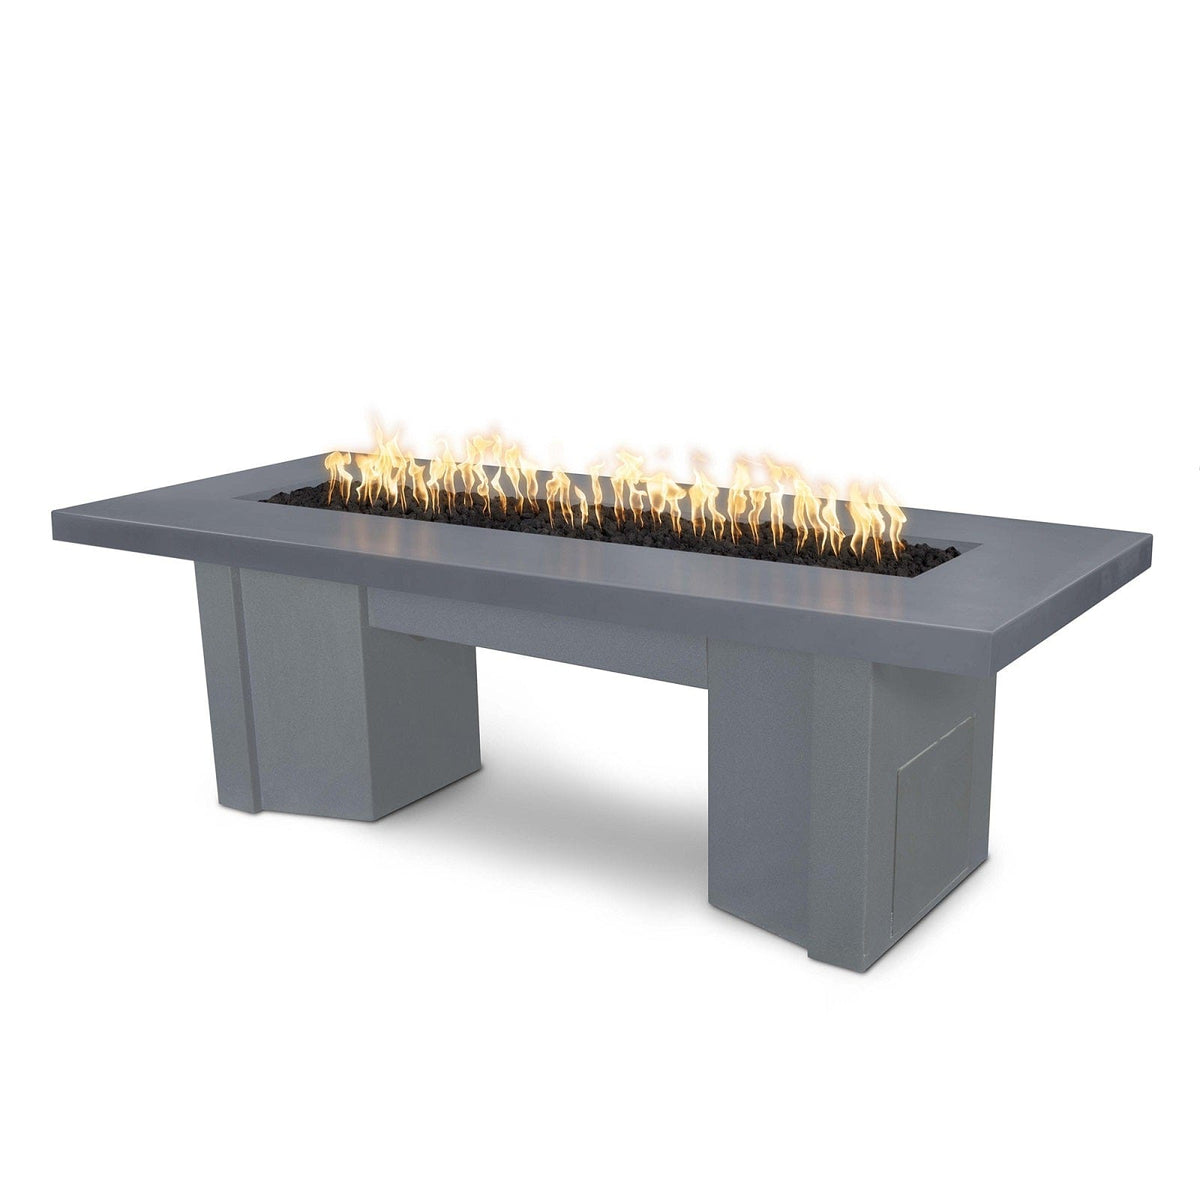 The Outdoor Plus Fire Features Gray (-GRY) / Gray Powder Coated Steel (-GRY) The Outdoor Plus 60&quot; Alameda Fire Table Smooth Concrete in Liquid Propane - 12V Electronic Ignition / OPT-ALMGFRC60E12V-LP